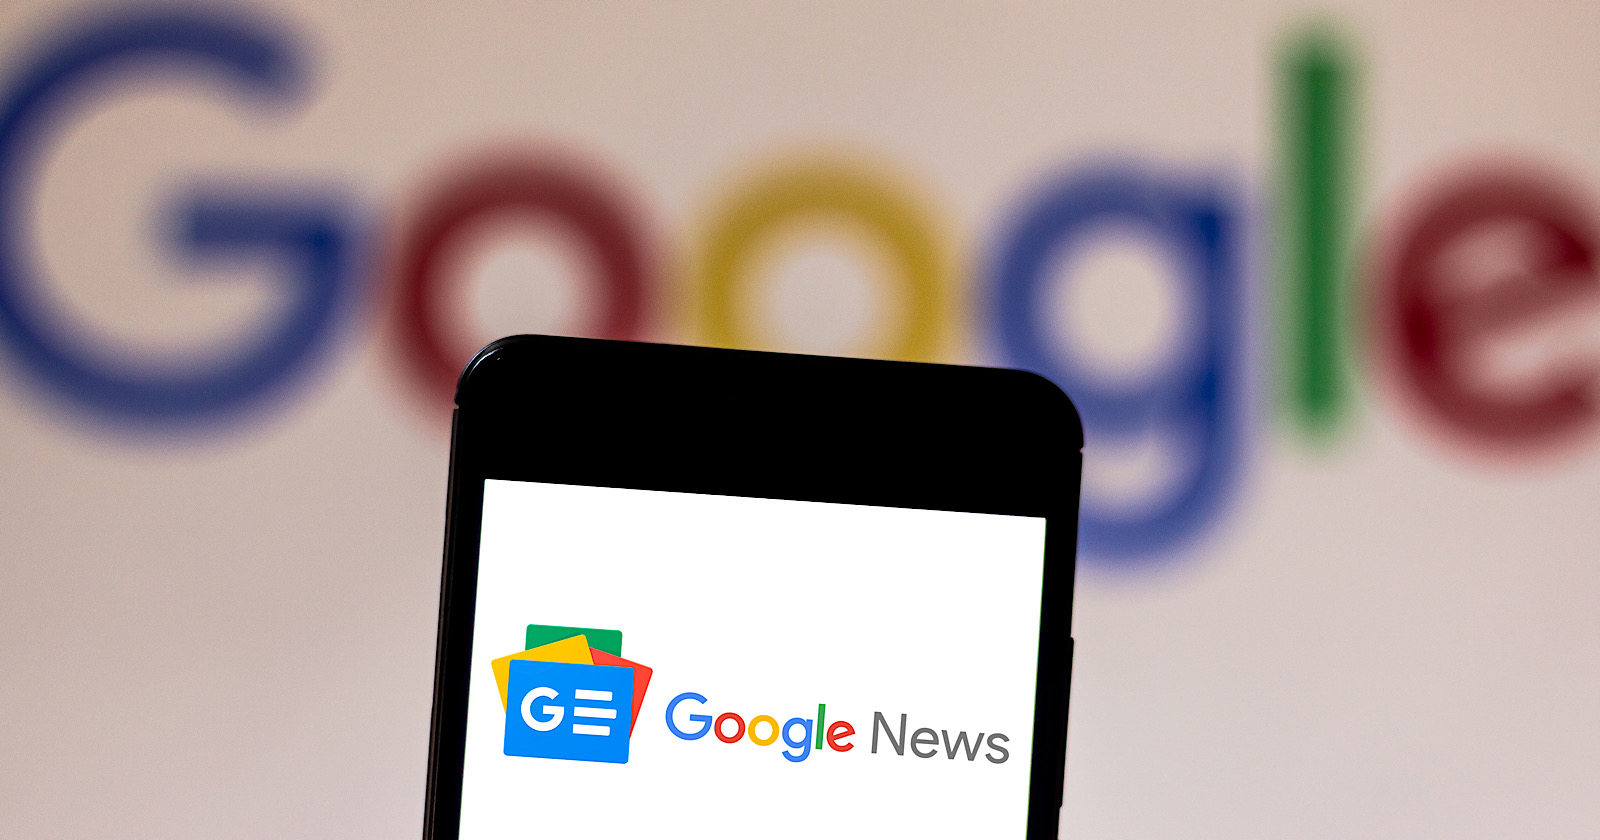 Google plans to pay publishers for news content